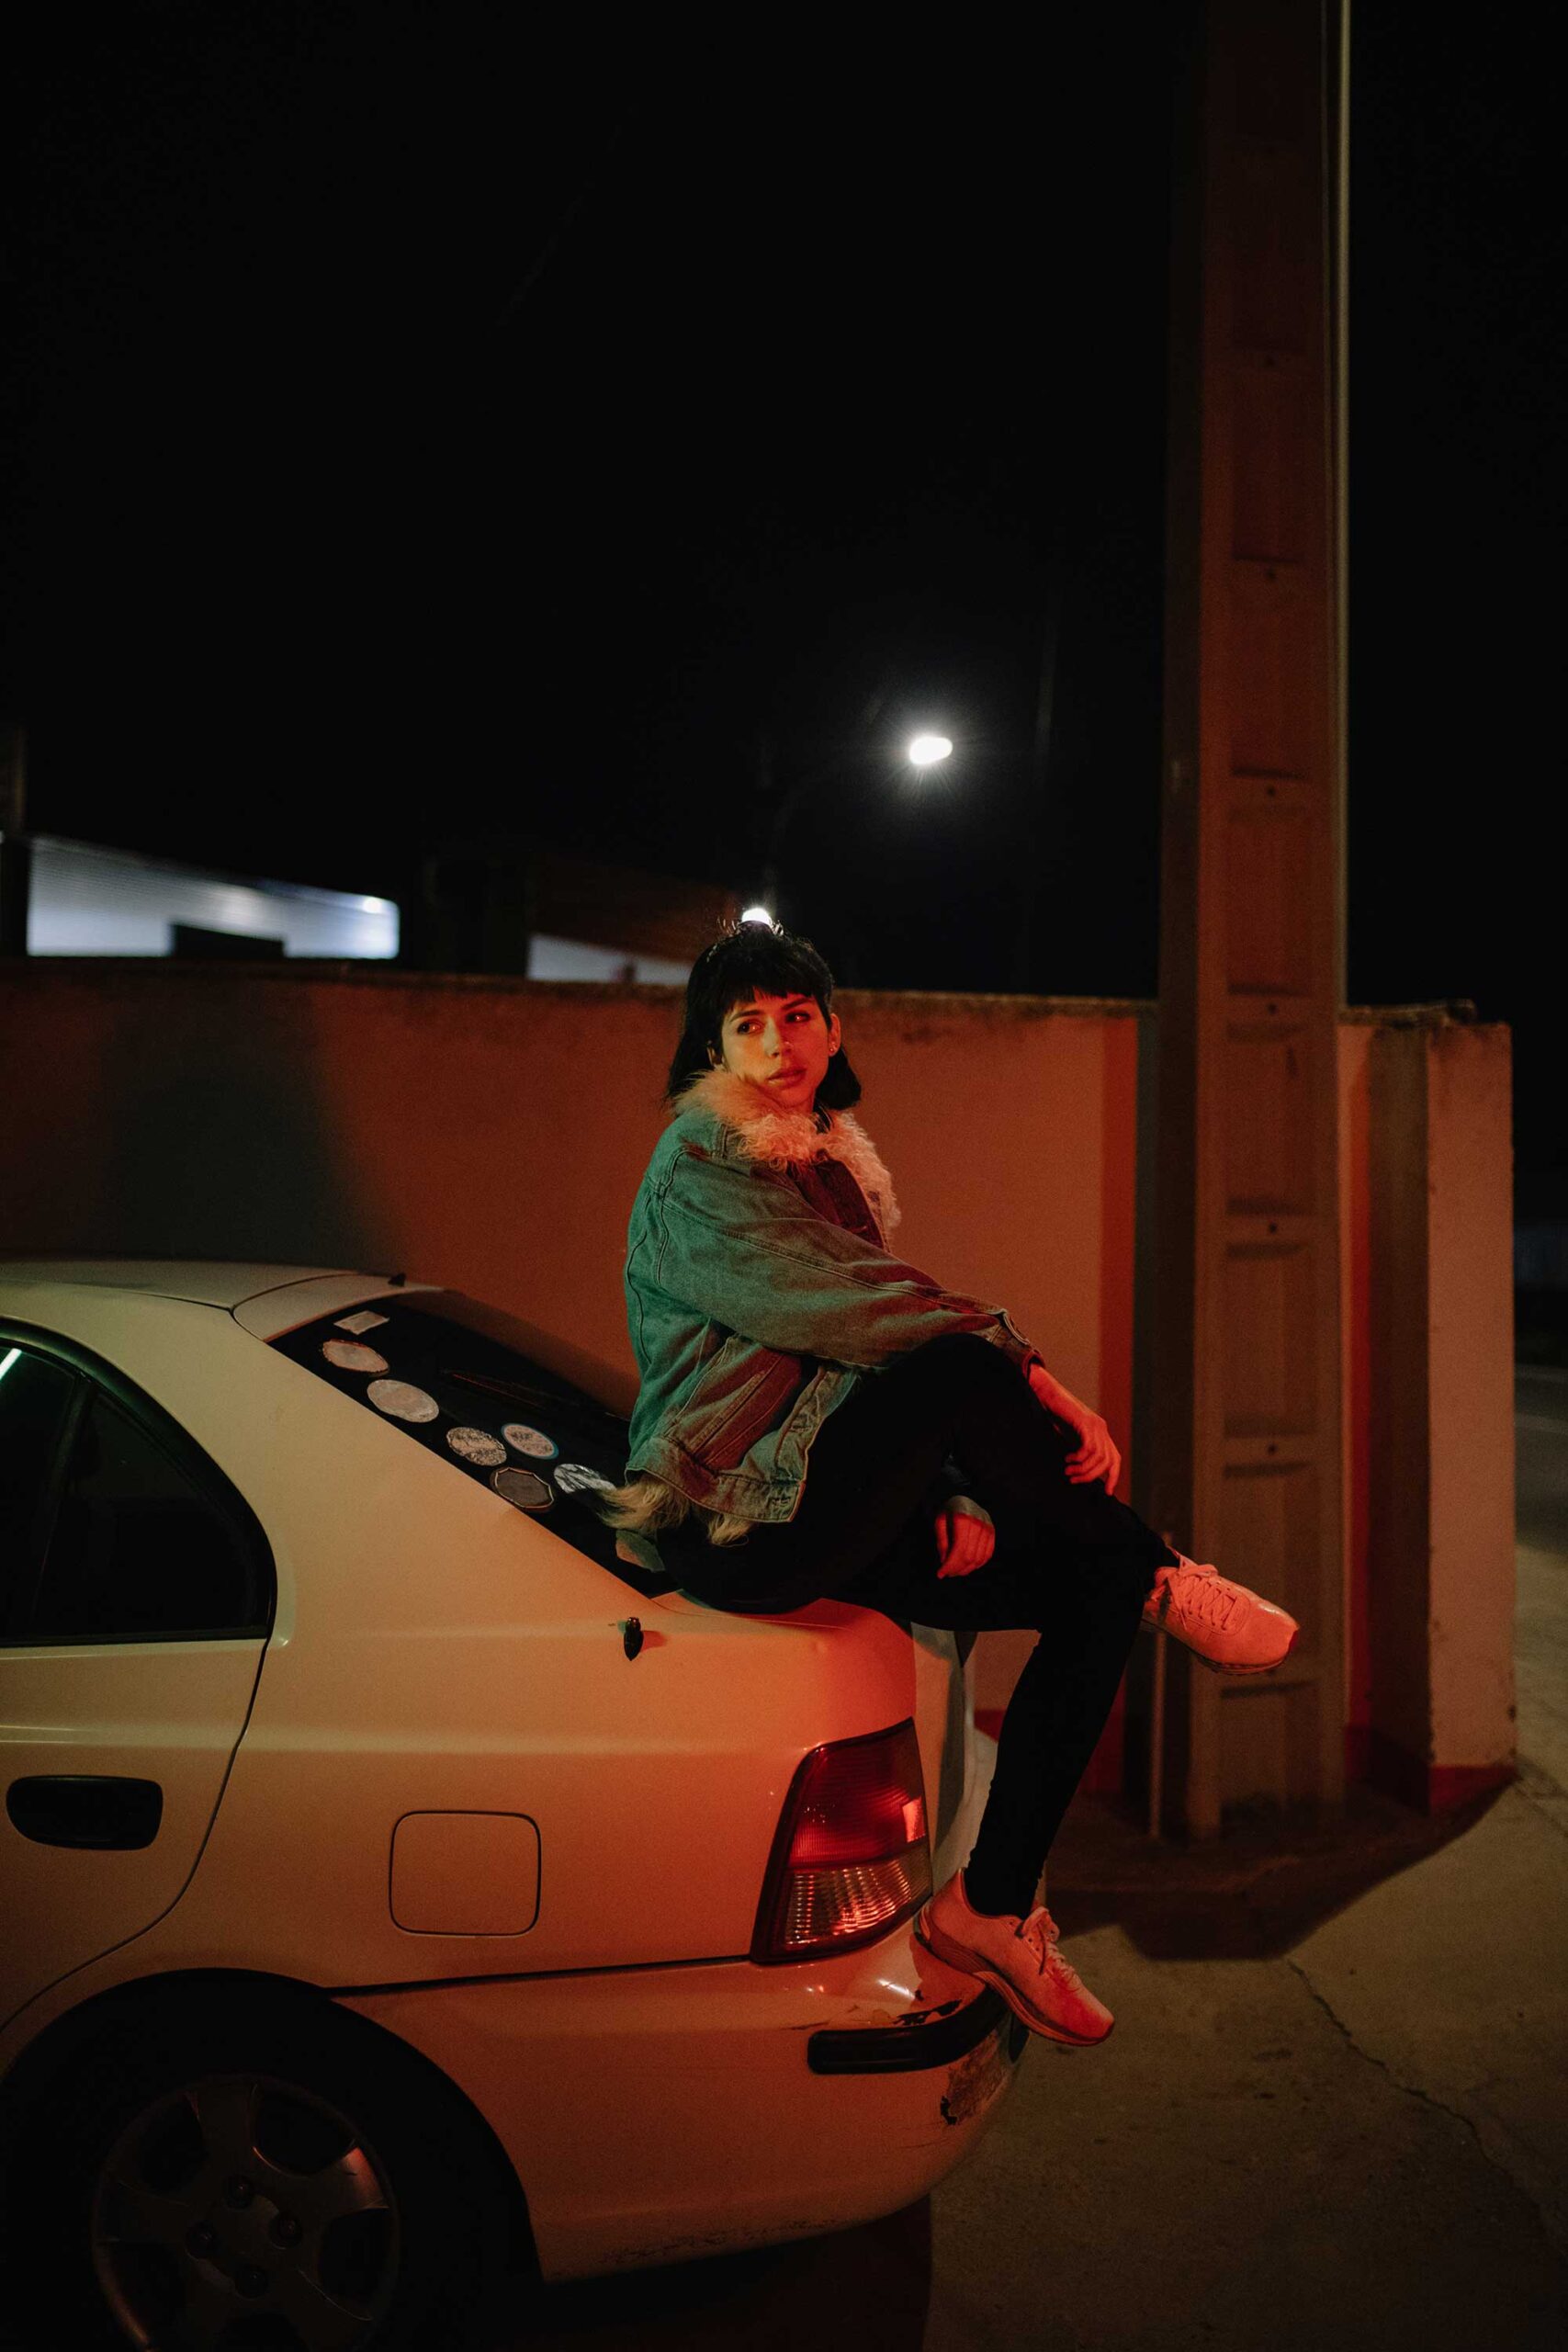 Stylish Woman On Cur Trunk In Nigh Young girl in denim jacket sitting on car trunk in nighttime looking away in neon light.